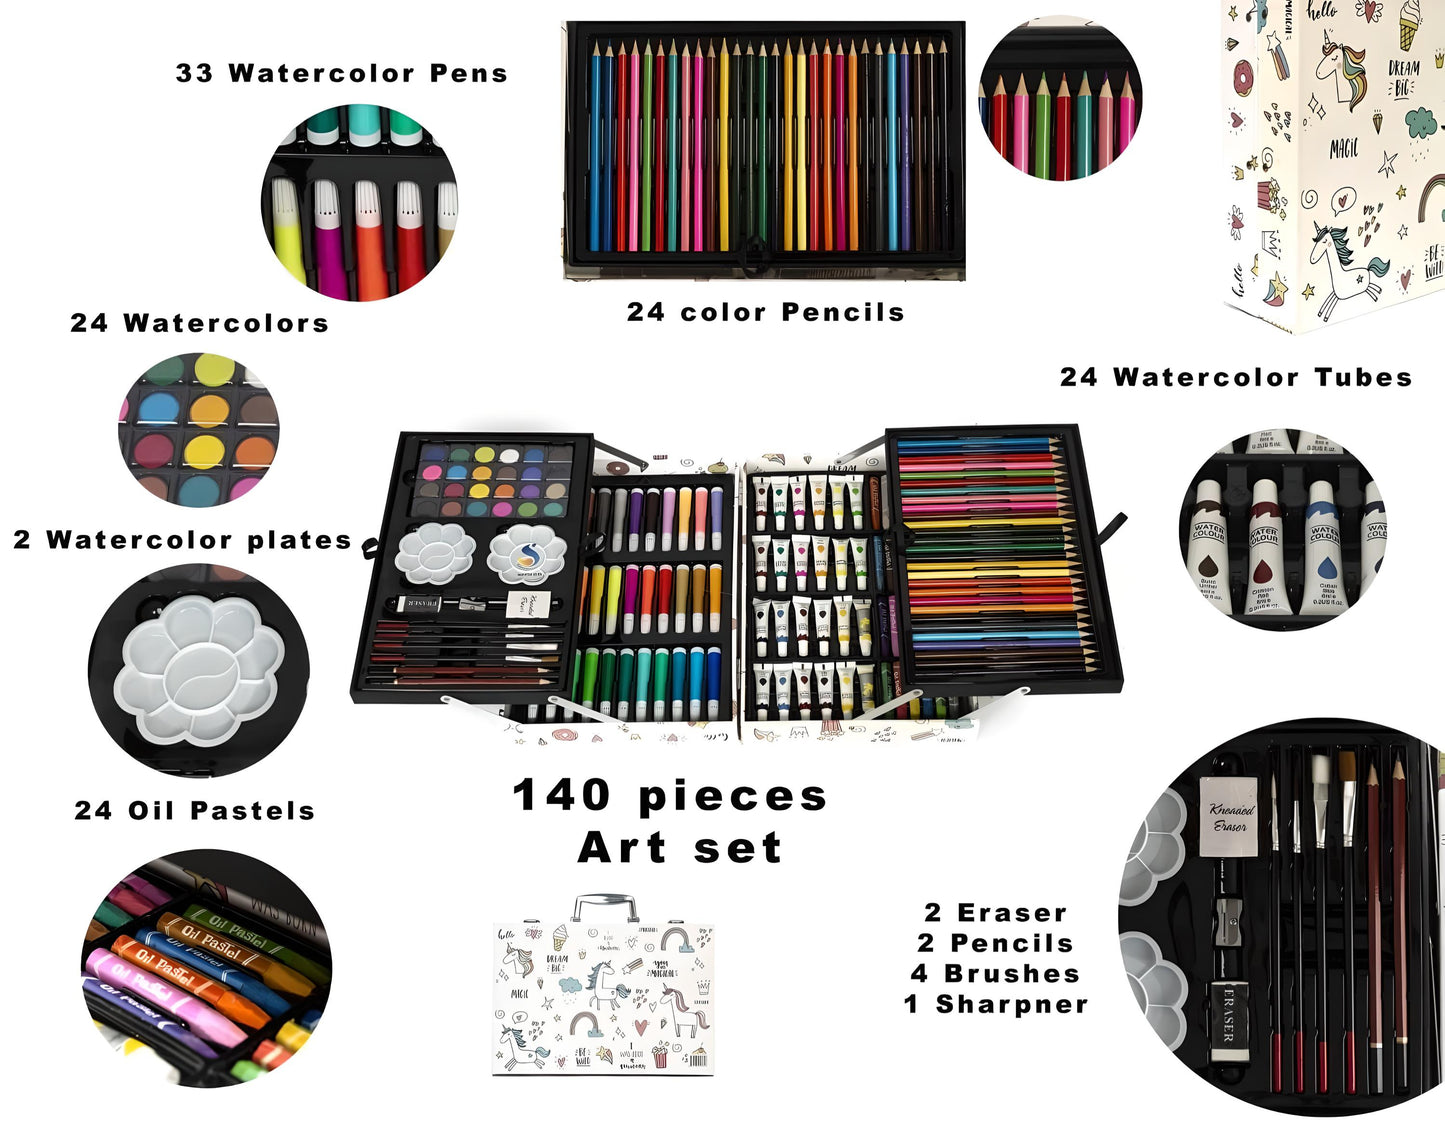 MM TOYS Ultimate Creativity Art Set - Zebra Unicorn Themed Multicolor Briefcase with 12 Oil Pastels, 10 Watercolors, 12 Sketch Pens, 12 Colored Pencils - Ideal Gift for Kids